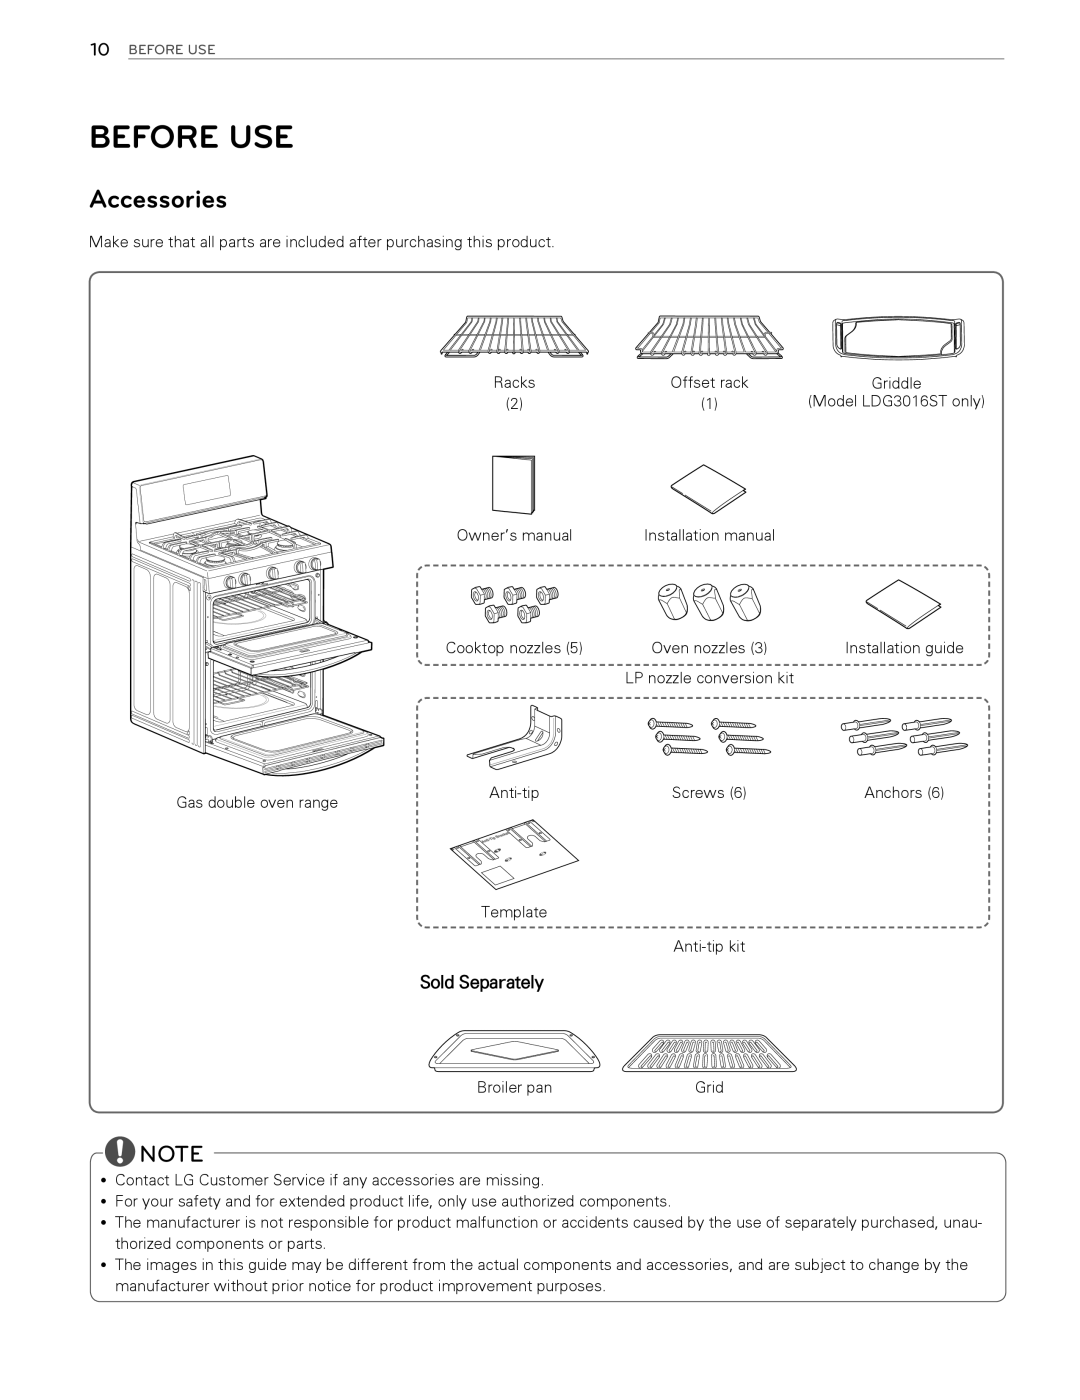 LG Electronics LDG3015SW, LDG3016ST, LDG3015ST, LDG3015SB owner manual Before Use, Accessories, Sold Separately 